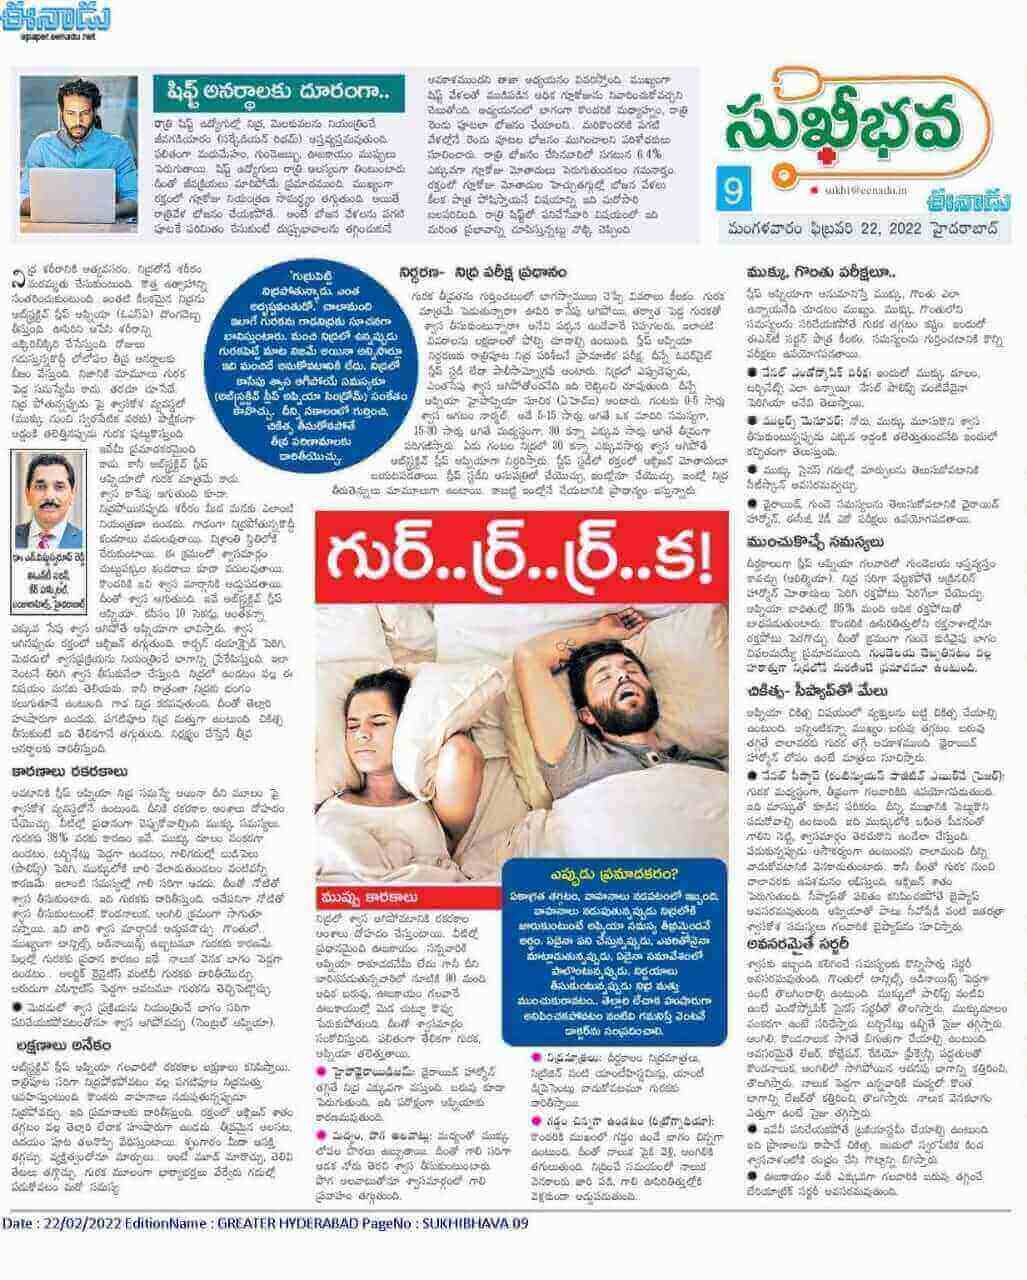 Article on Snoring and OSA by Dr. Vishnu Swaroop Reddy - Clinical Director Head of the Dept. & Chief Consultant ENT and Facial Plastic Surgeon